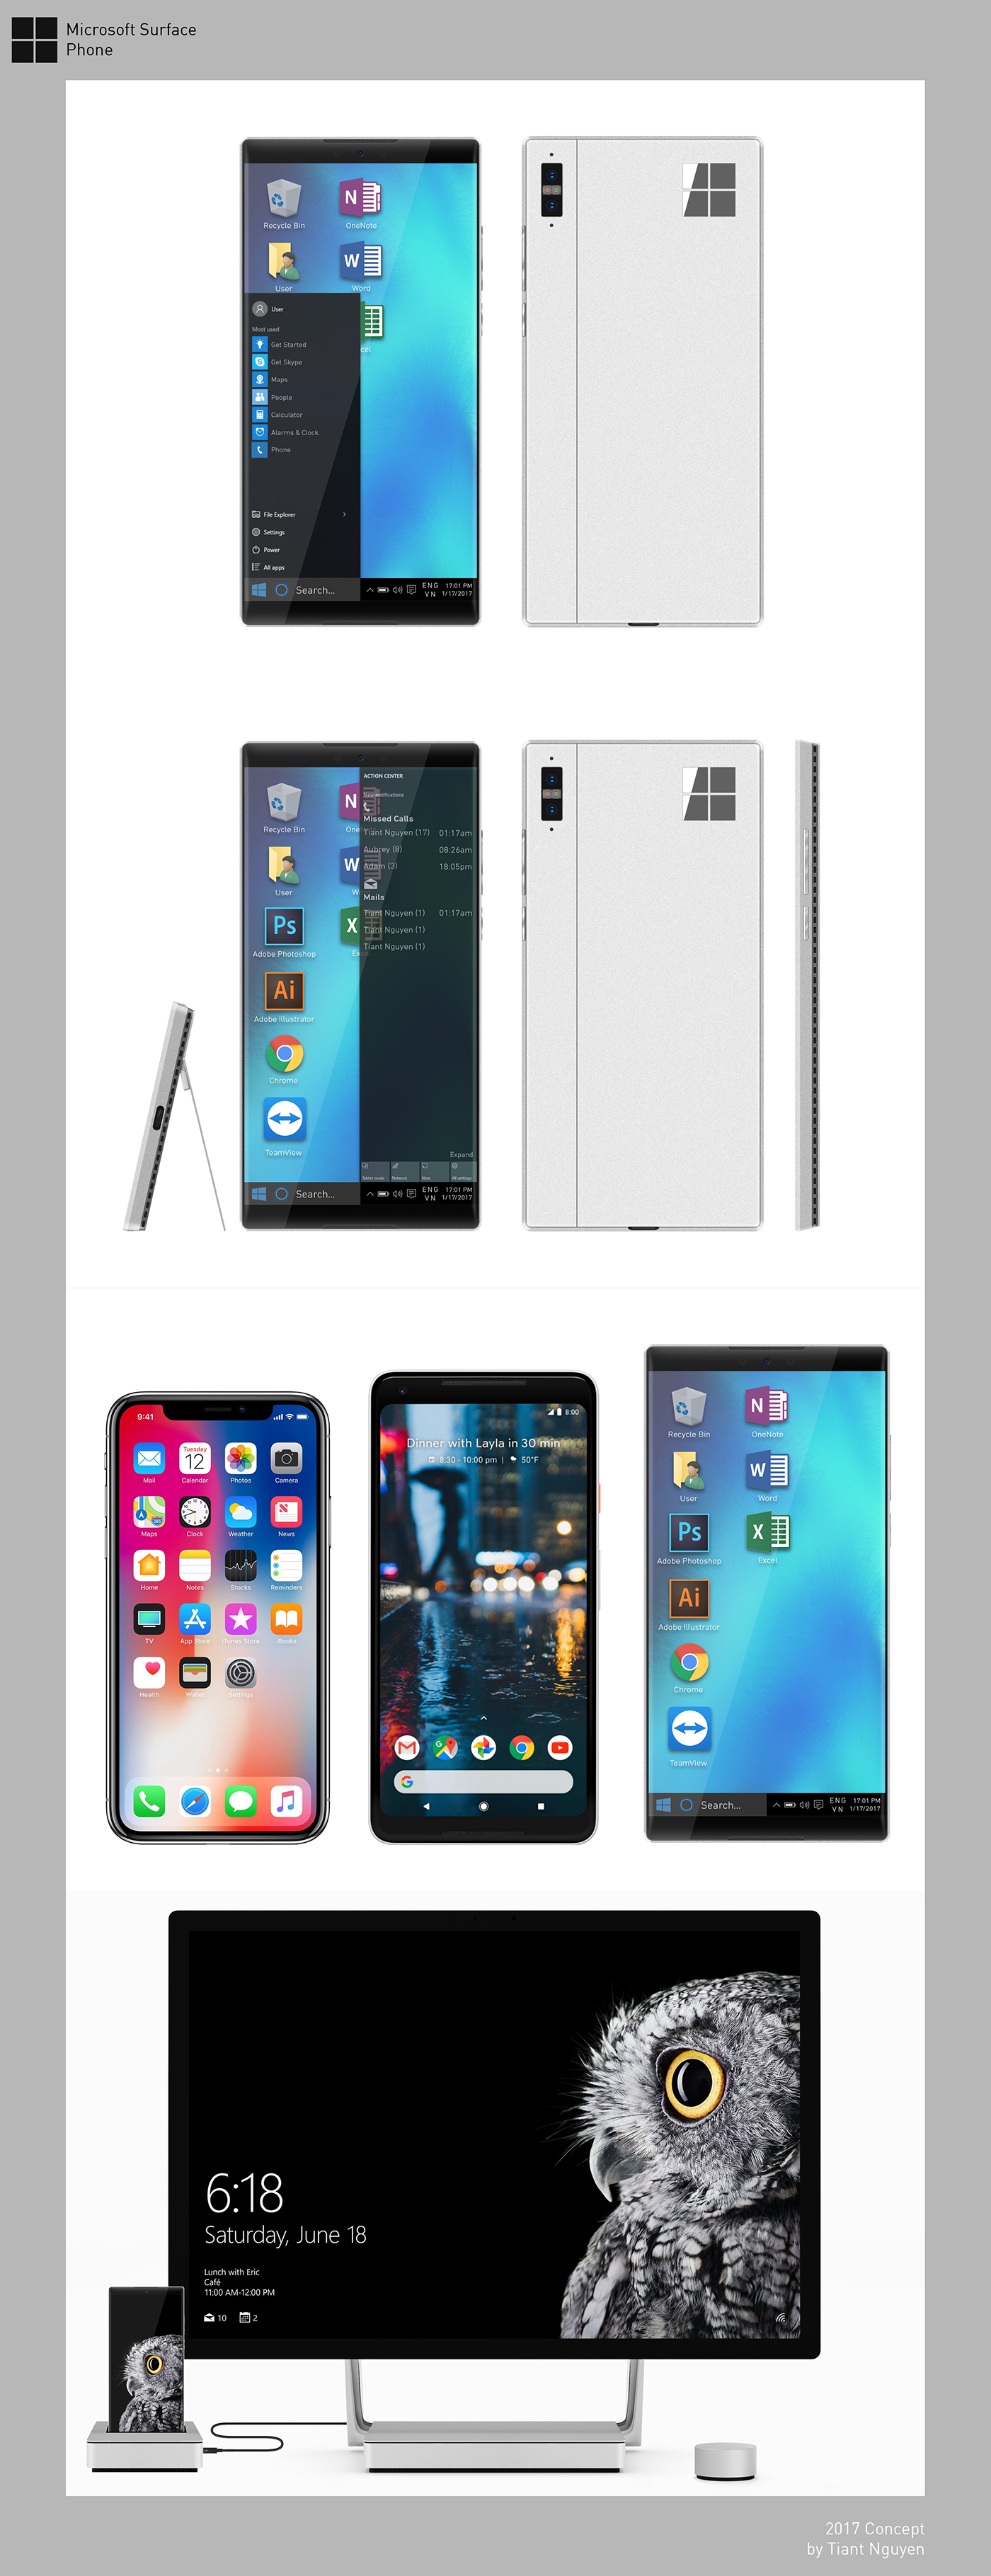 smartphone concept phone Microsoft surface surface phone concept mobile photoshop Illustrator